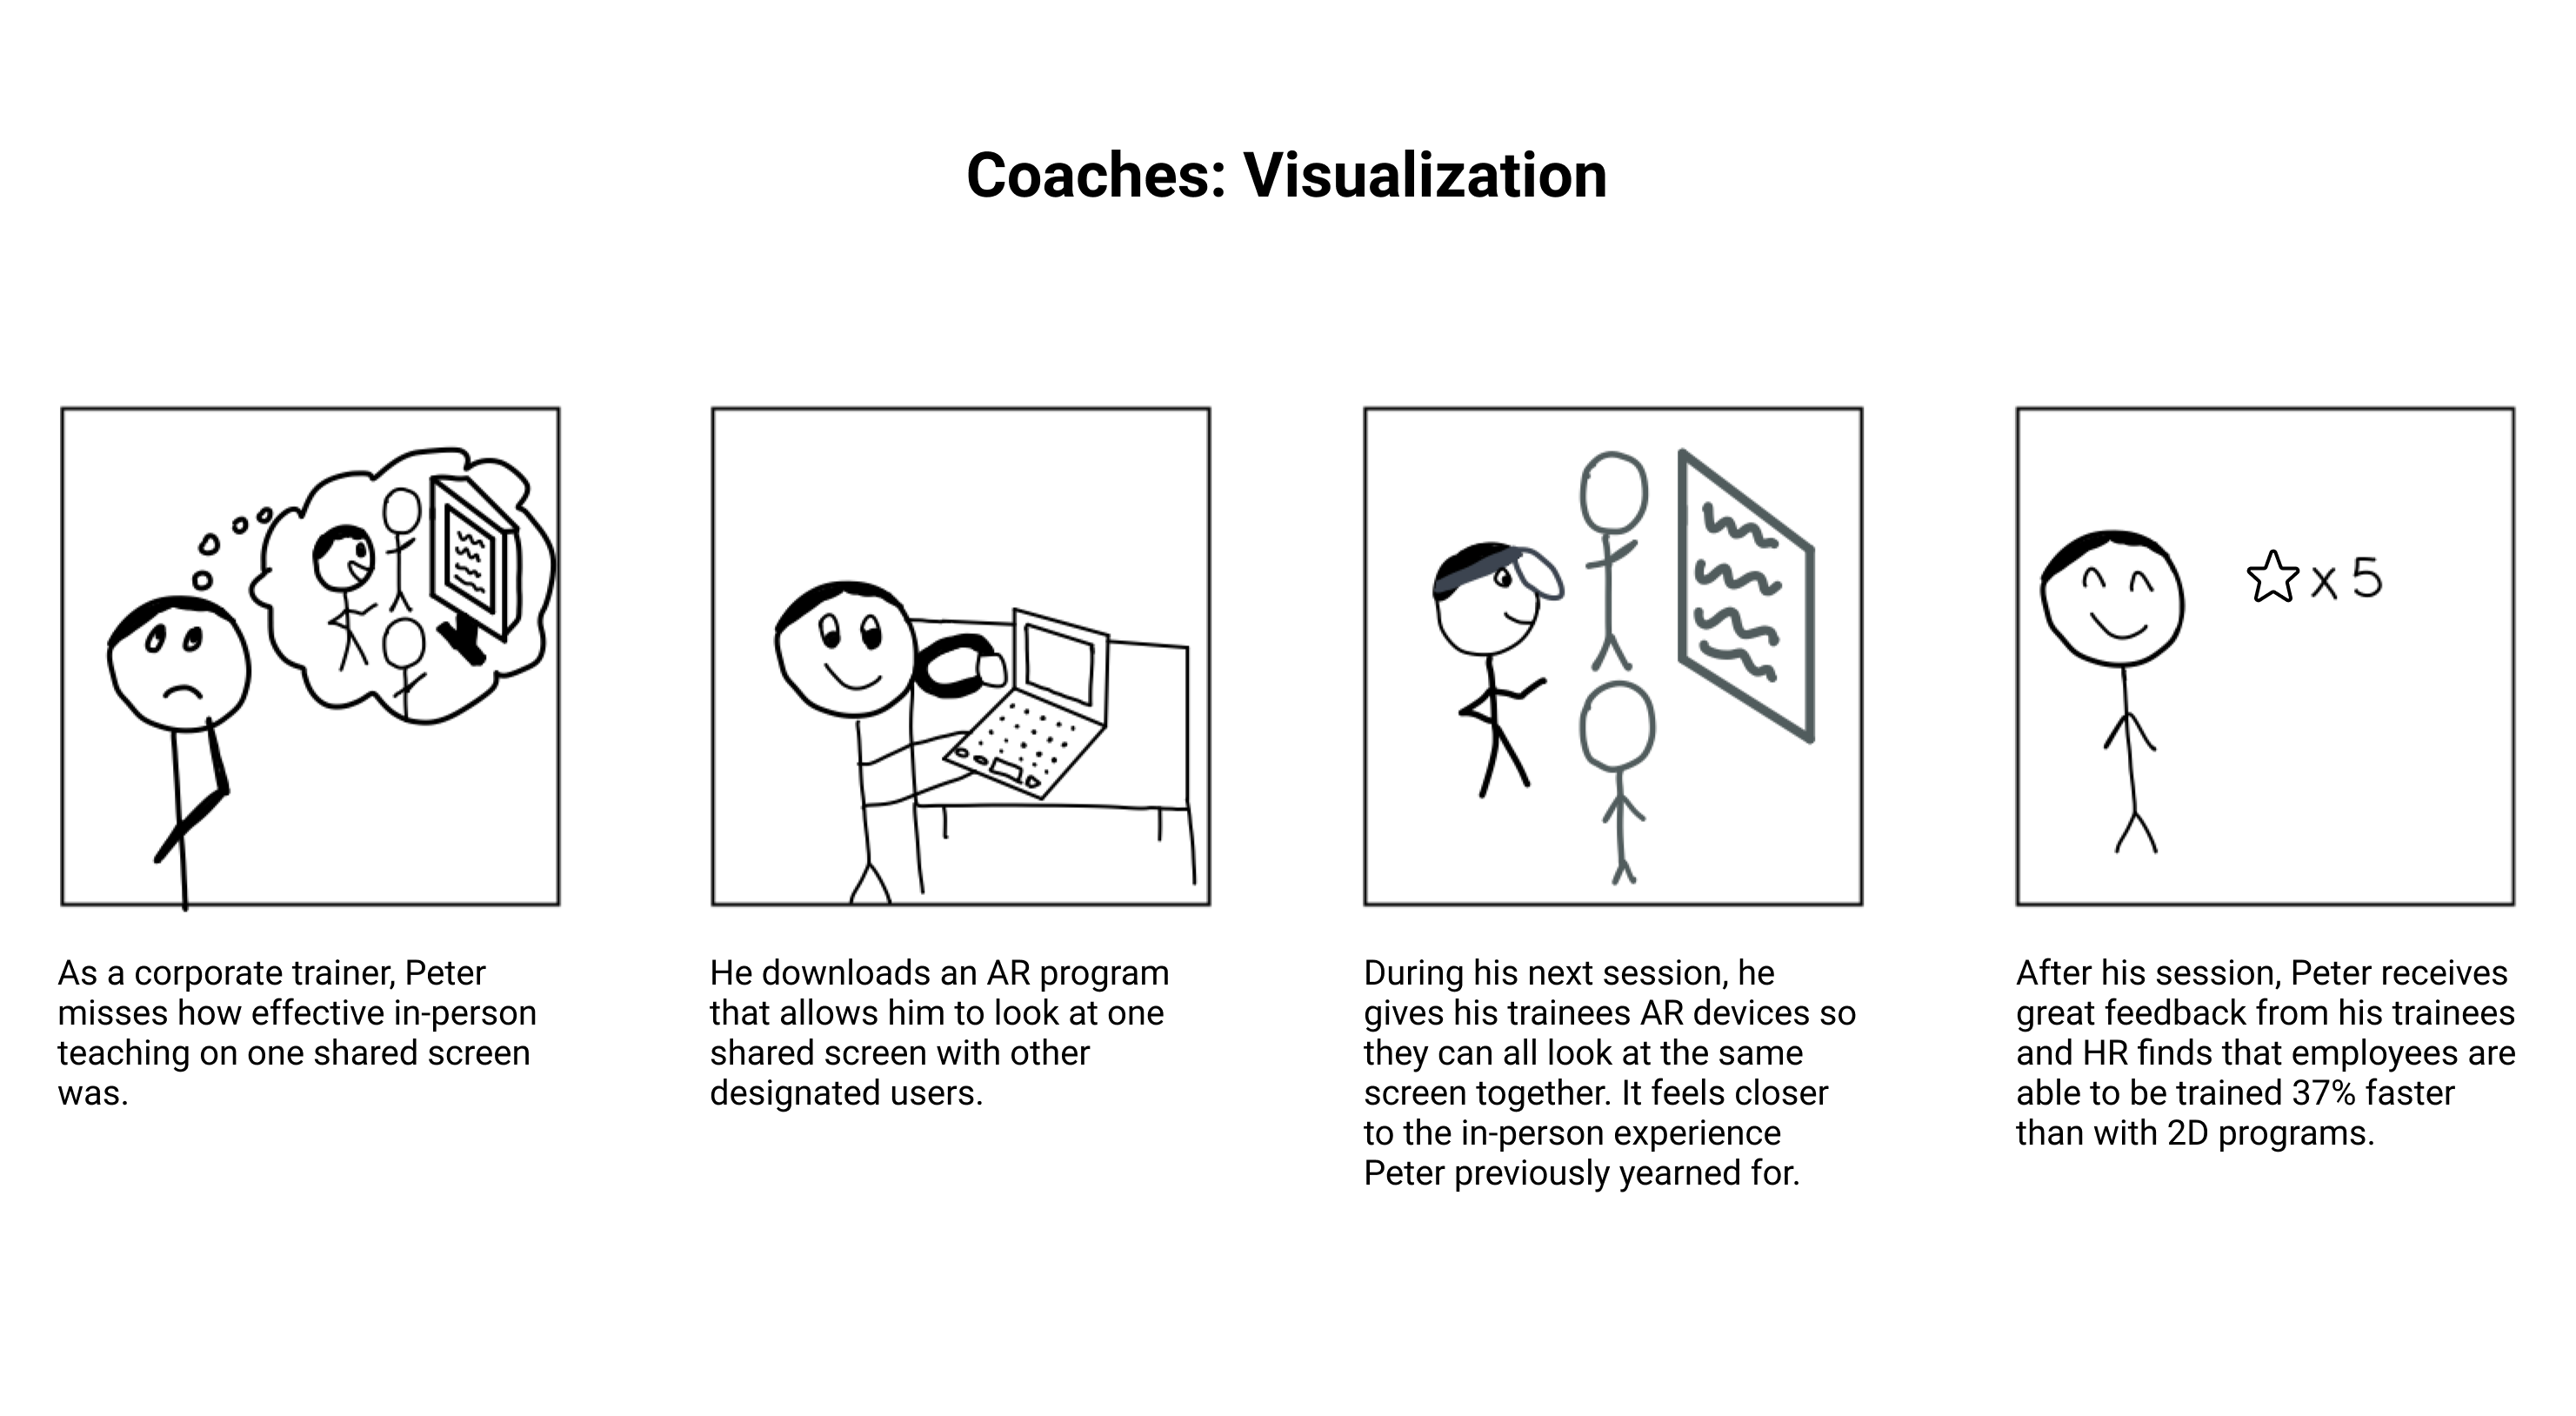 Coaches can use Visualization to create a central focal point for training